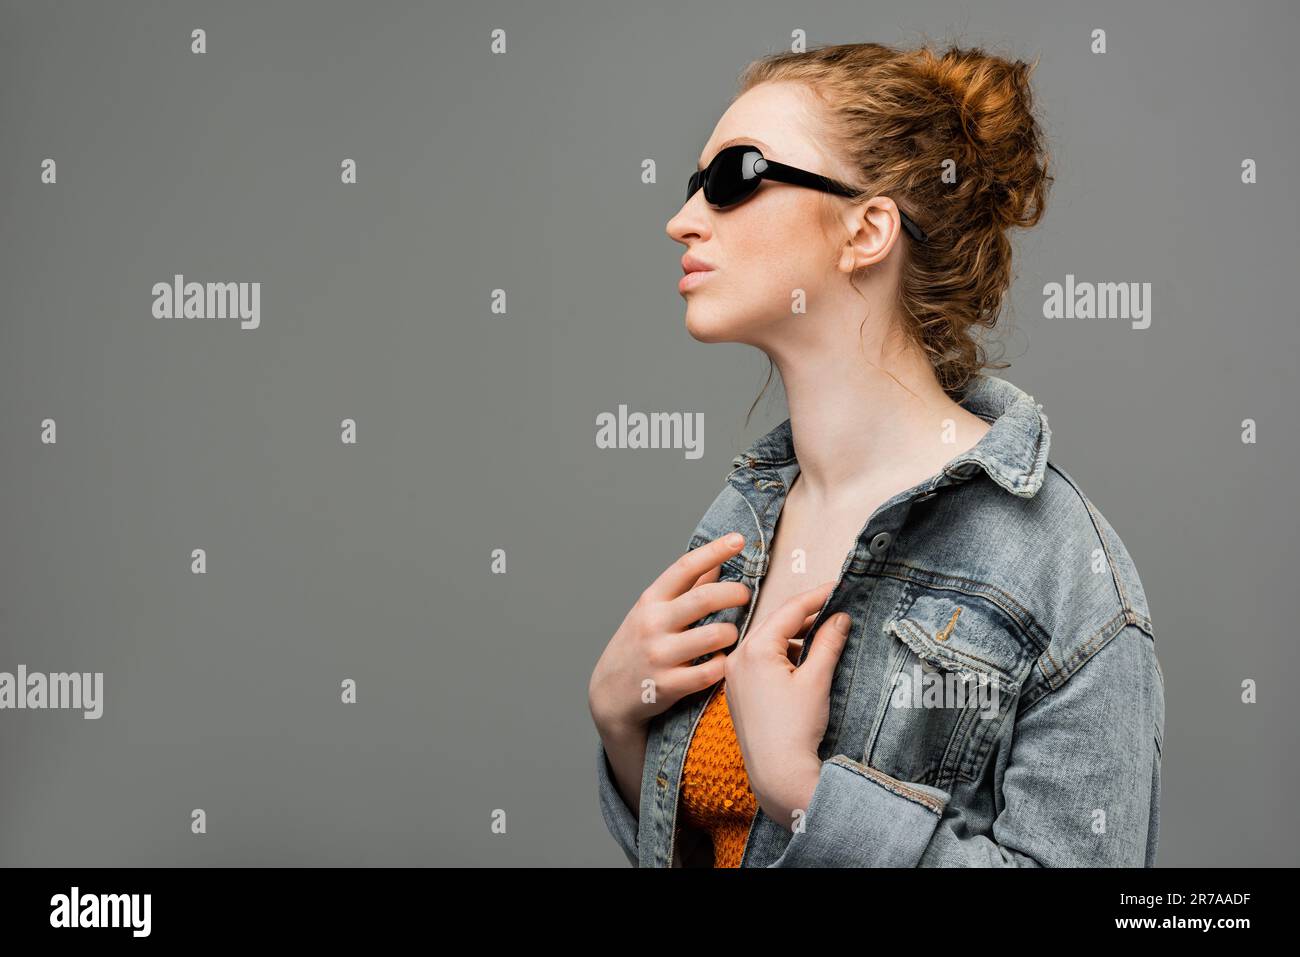 Young redhead model with natural makeup posing in sunglasses and top with sequins while touching denim jacket isolated on grey background, trendy sun Stock Photo